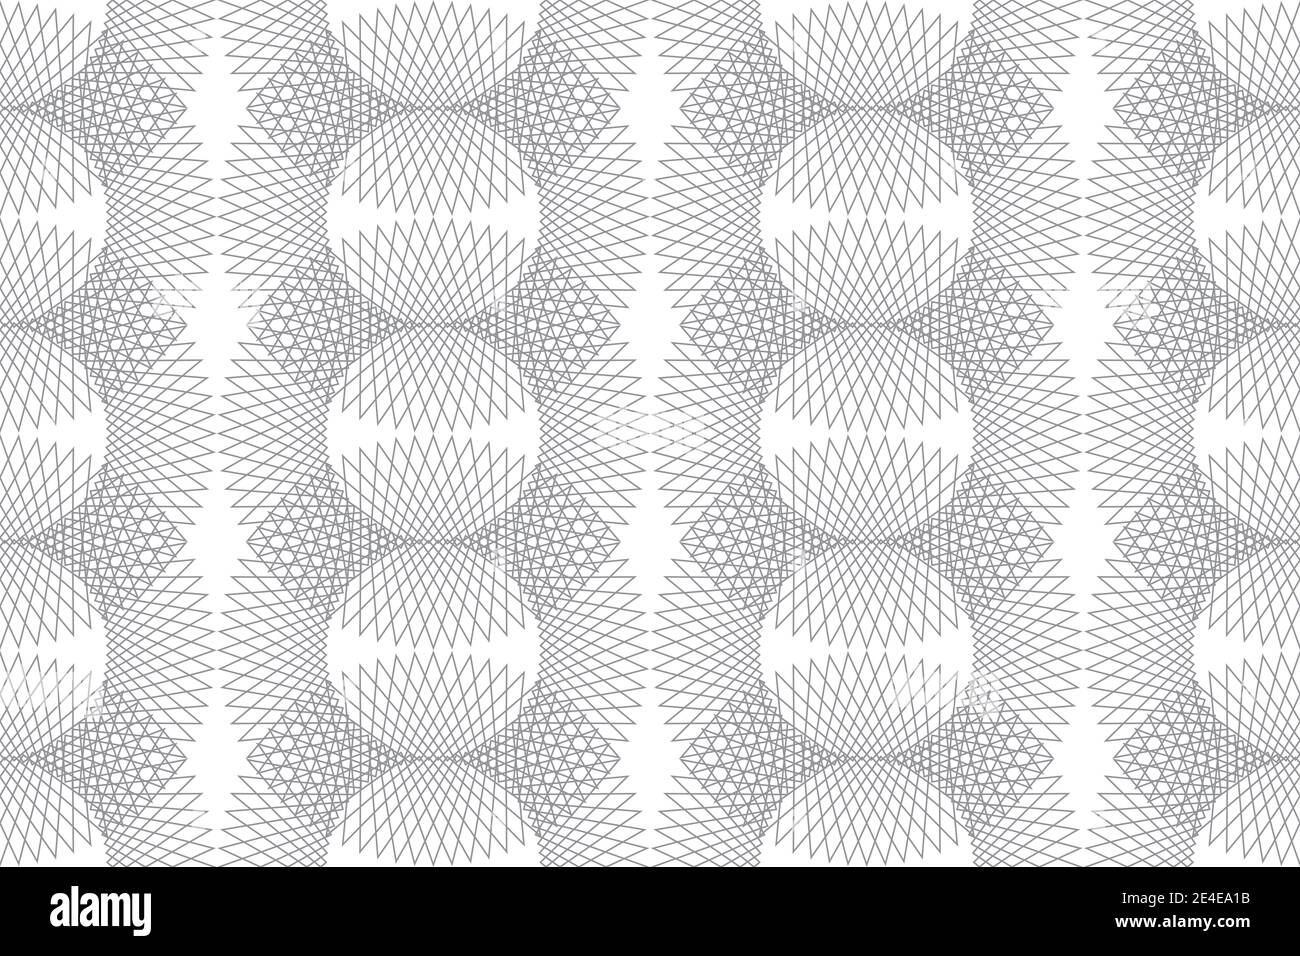 Seamless, abstract background pattern made with repetitive lines forming circular geometric shapes, Mandala style vector art in black and white colors Stock Photo